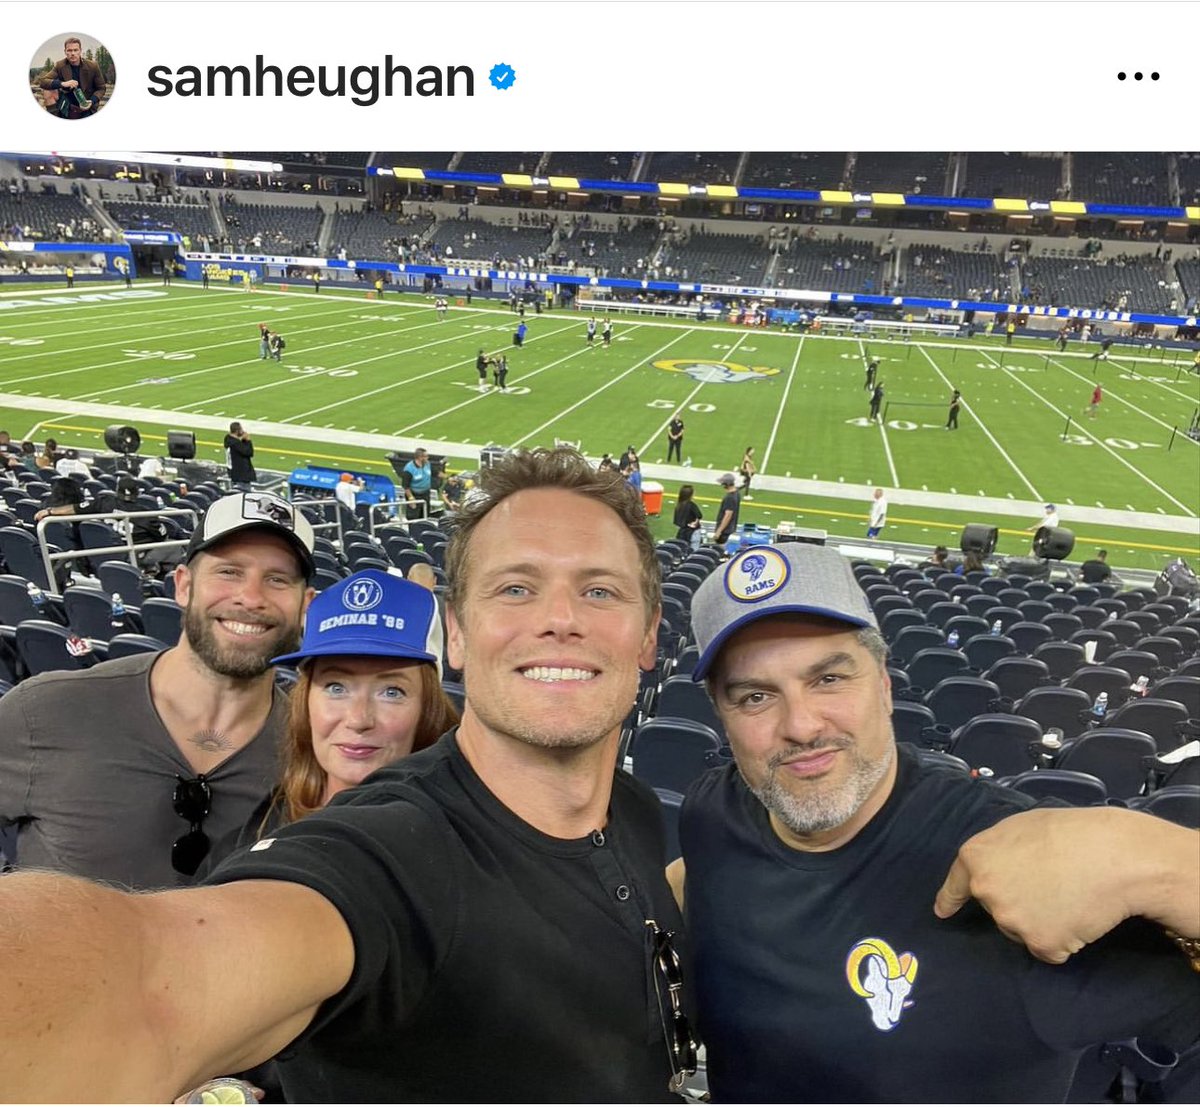 Sam just posted this on his IG page!!! Looks like he’s having a great time!!!!🫶🫶🫶😘😘😘🏈🏈🏈@SamHeughan #SamHeughan